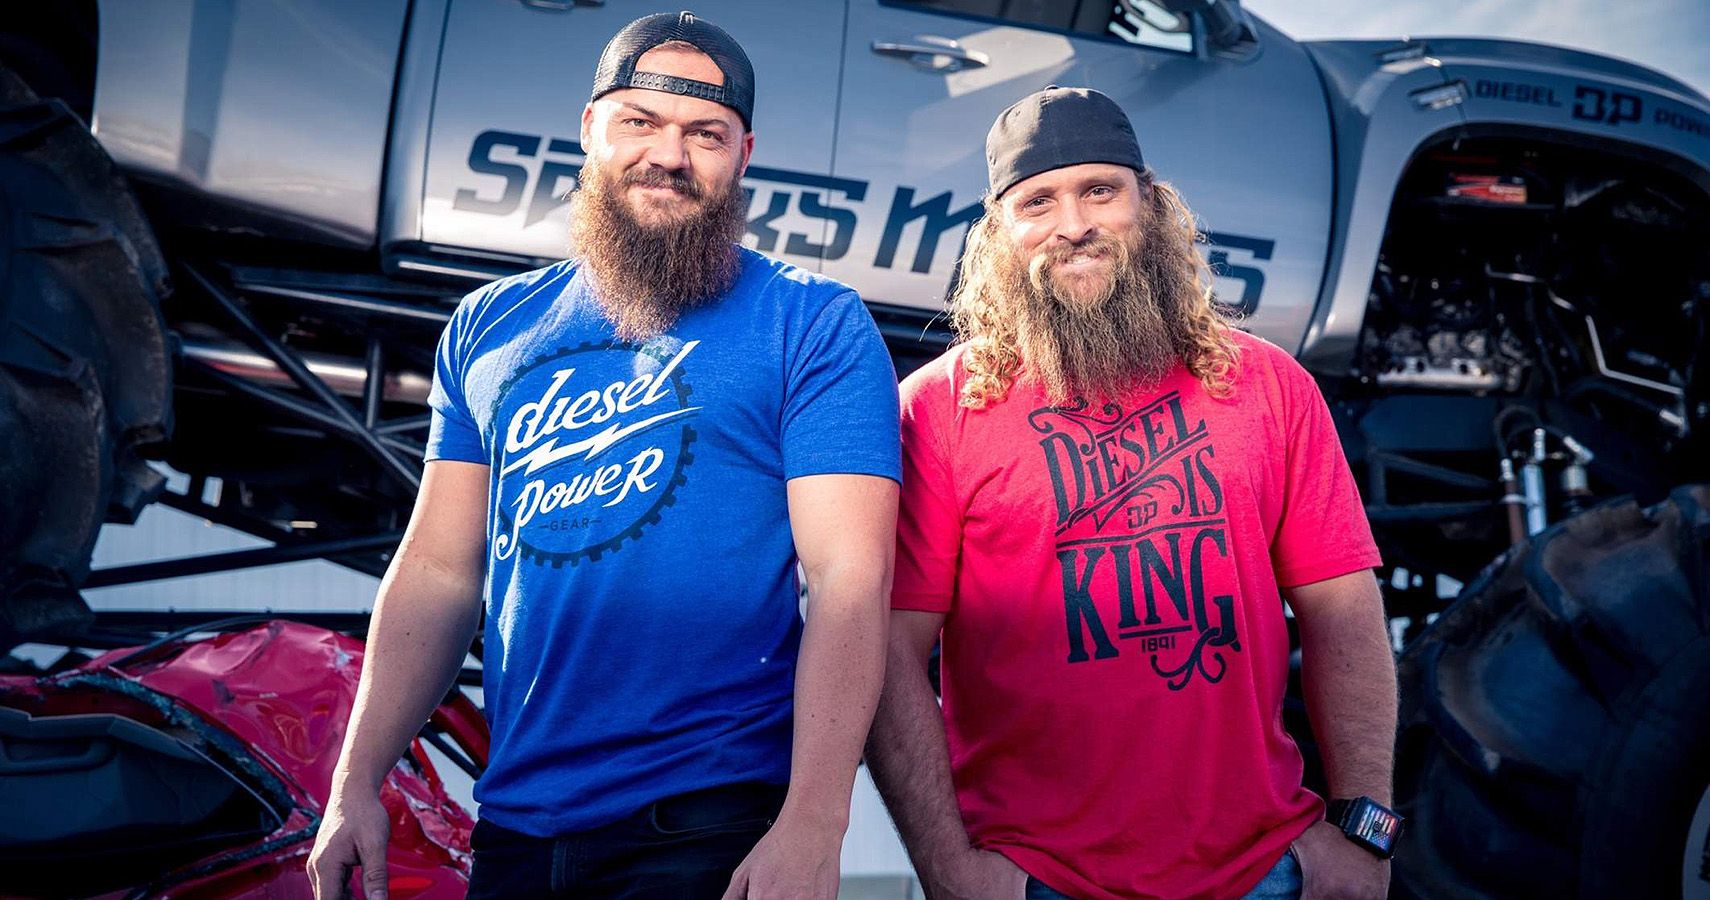 The Diesel Brothers Aren’t Really “Brothers”